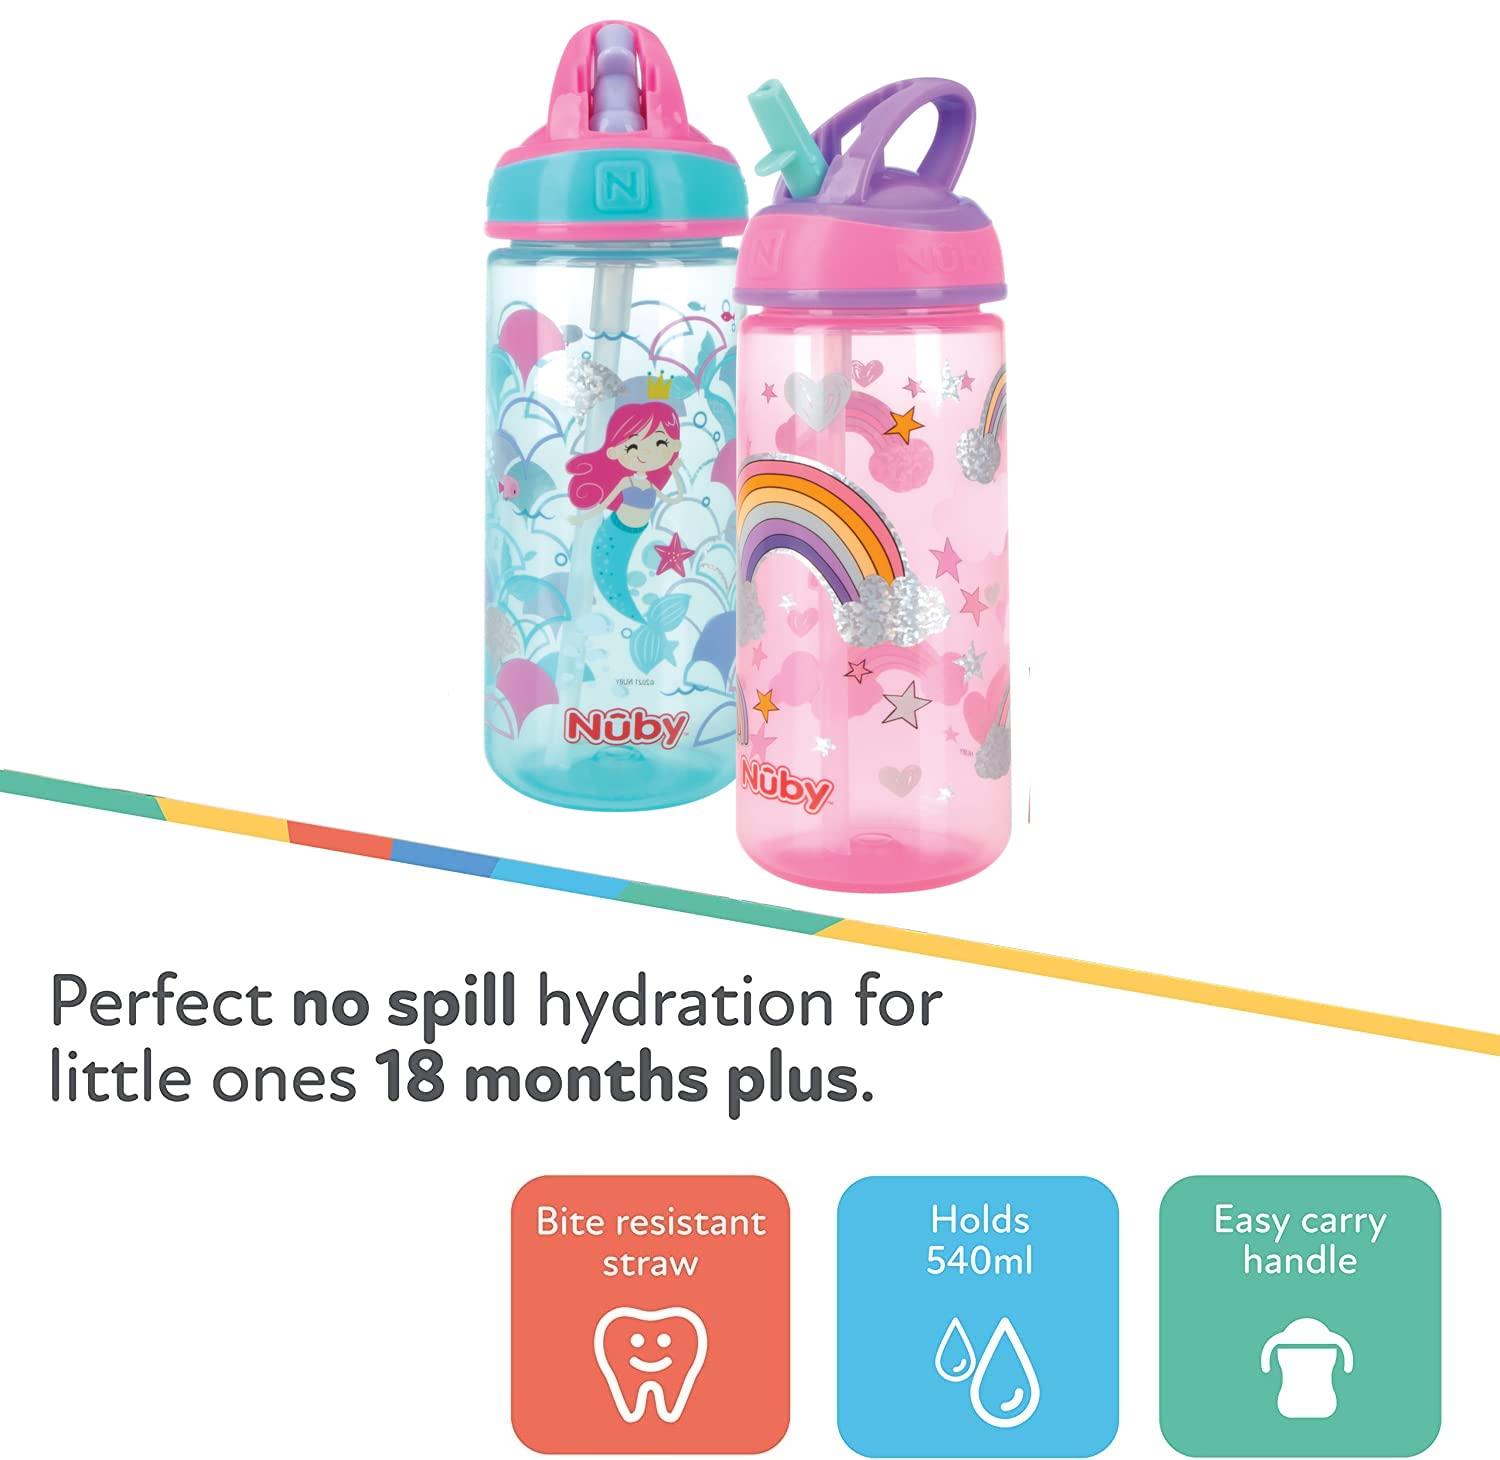 Nuby 2-Pack Kid's Printed Flip-it Active Water Bottle with Push Button Cap  and Soft Straw - 18oz / 540ml, 18+ Months, 2-Pack, Unicorns/Sweet Treats